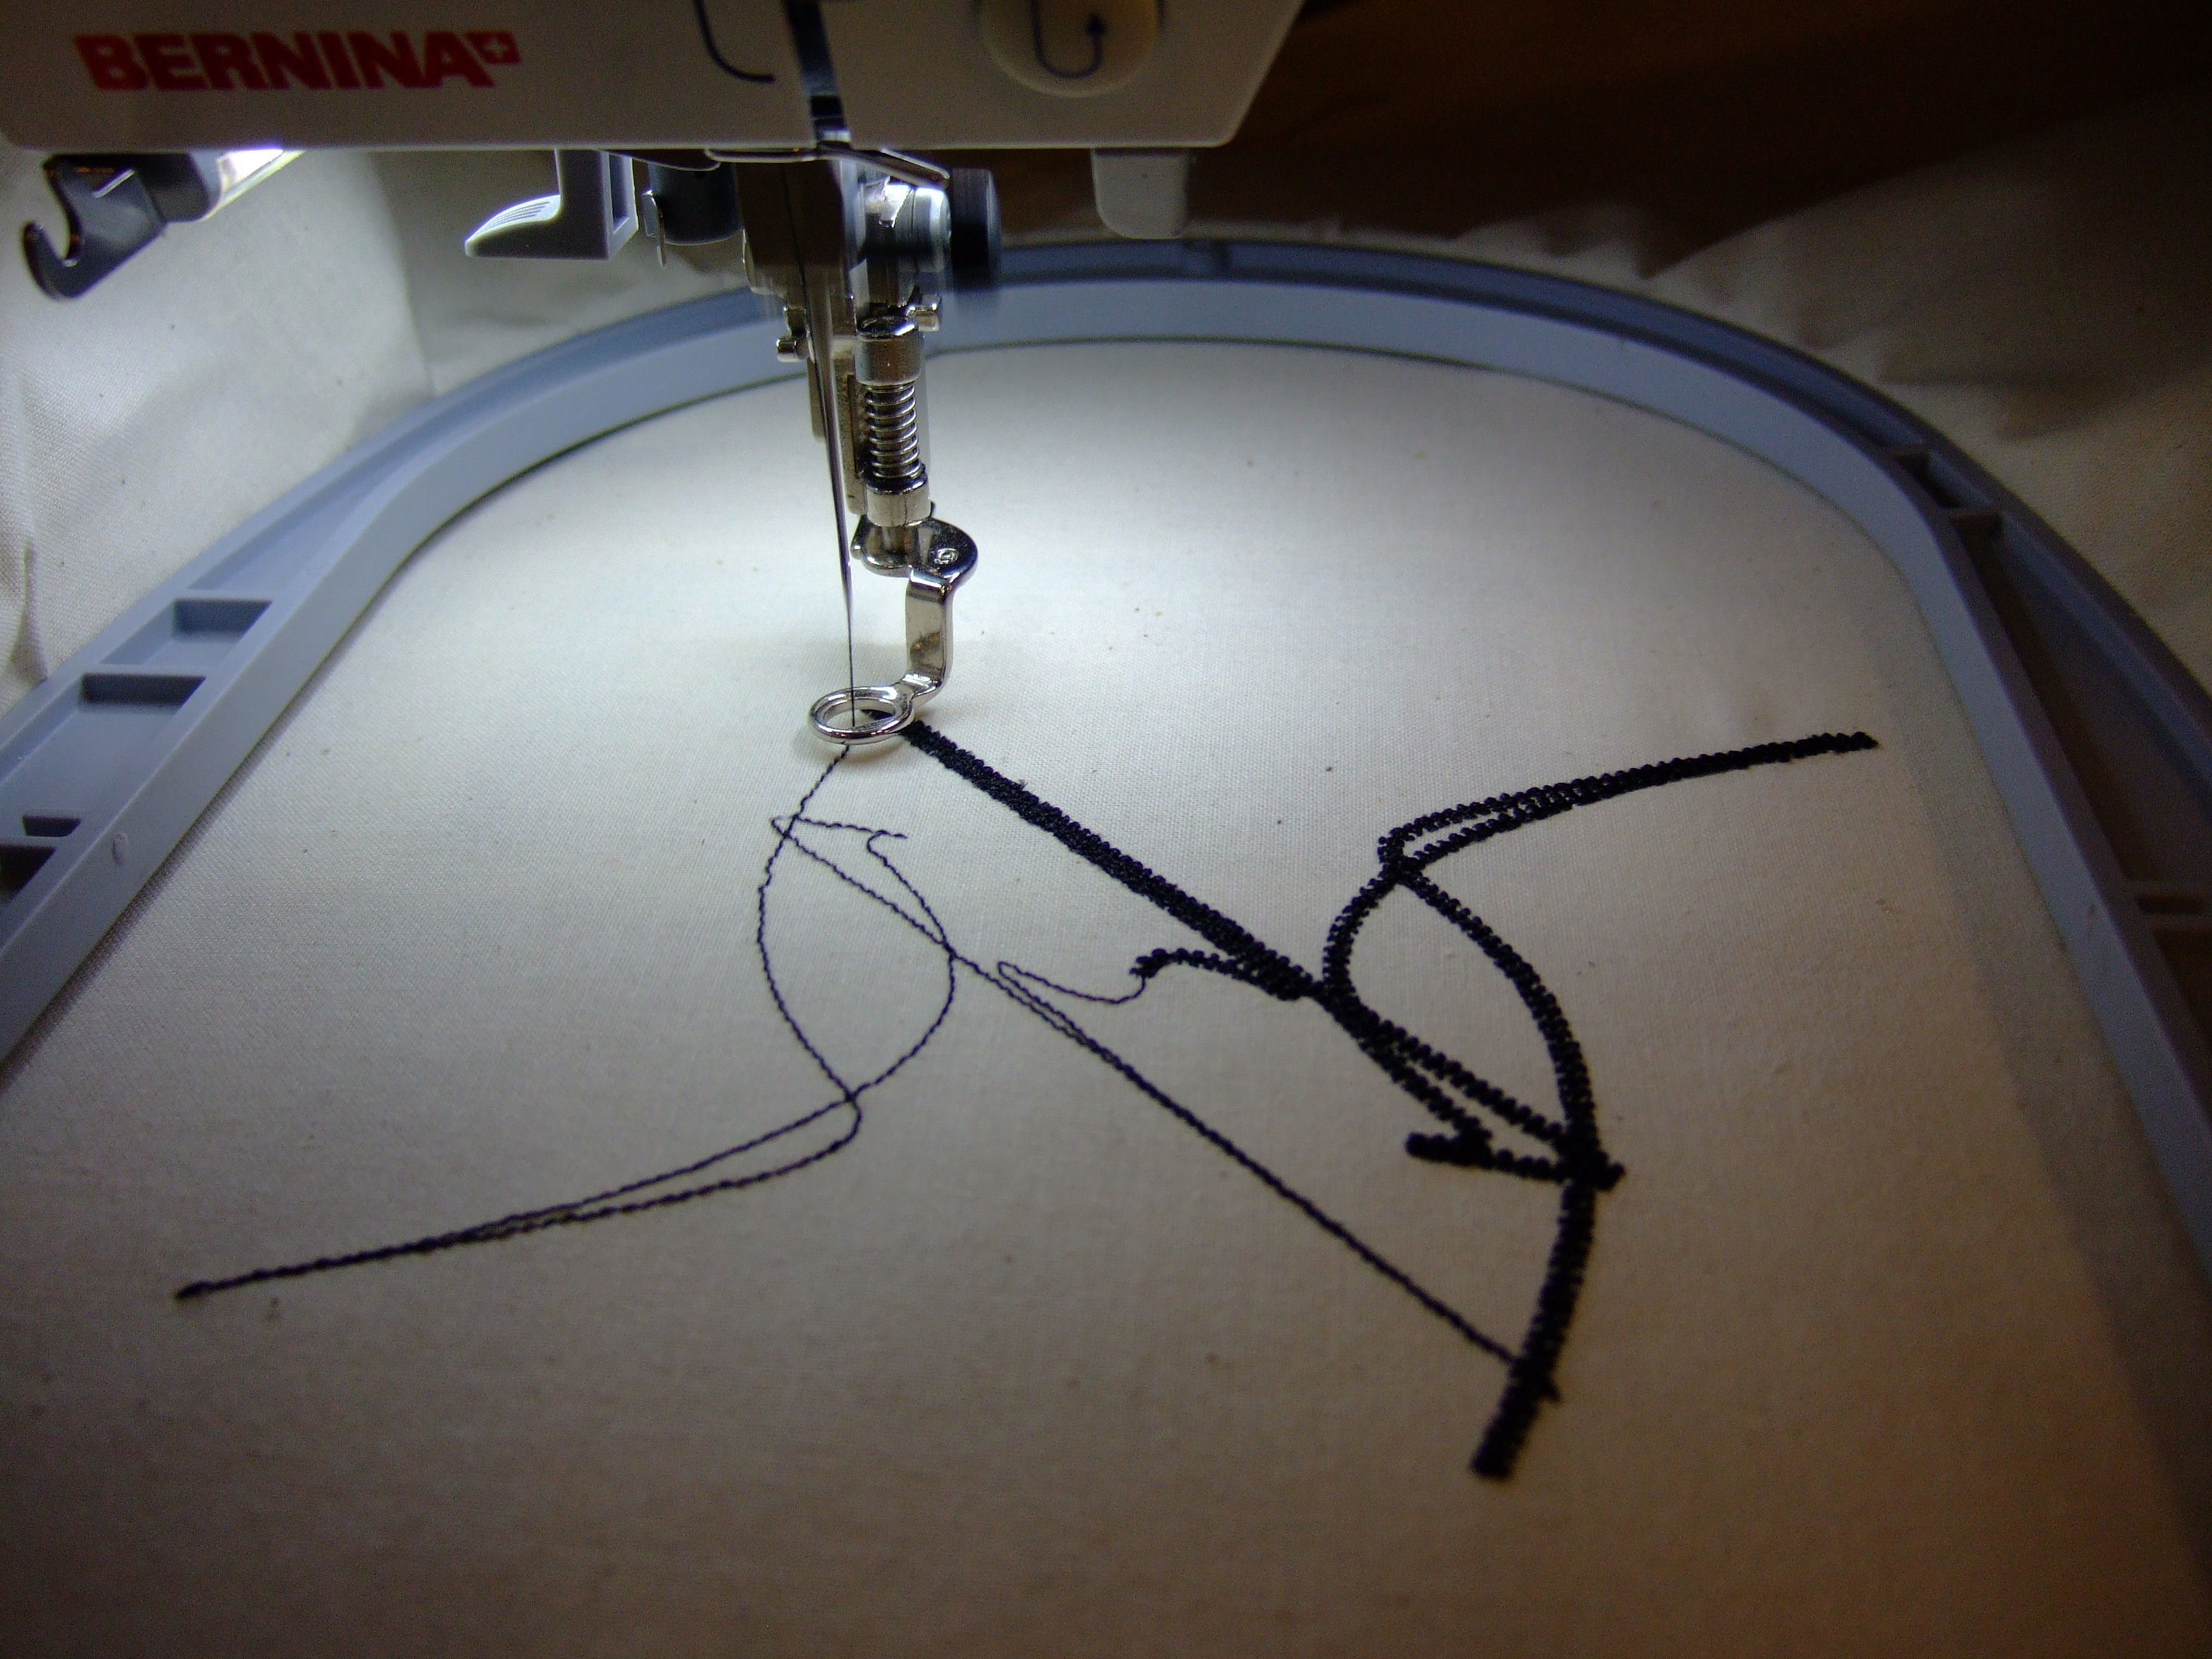 Embroidering the pattern